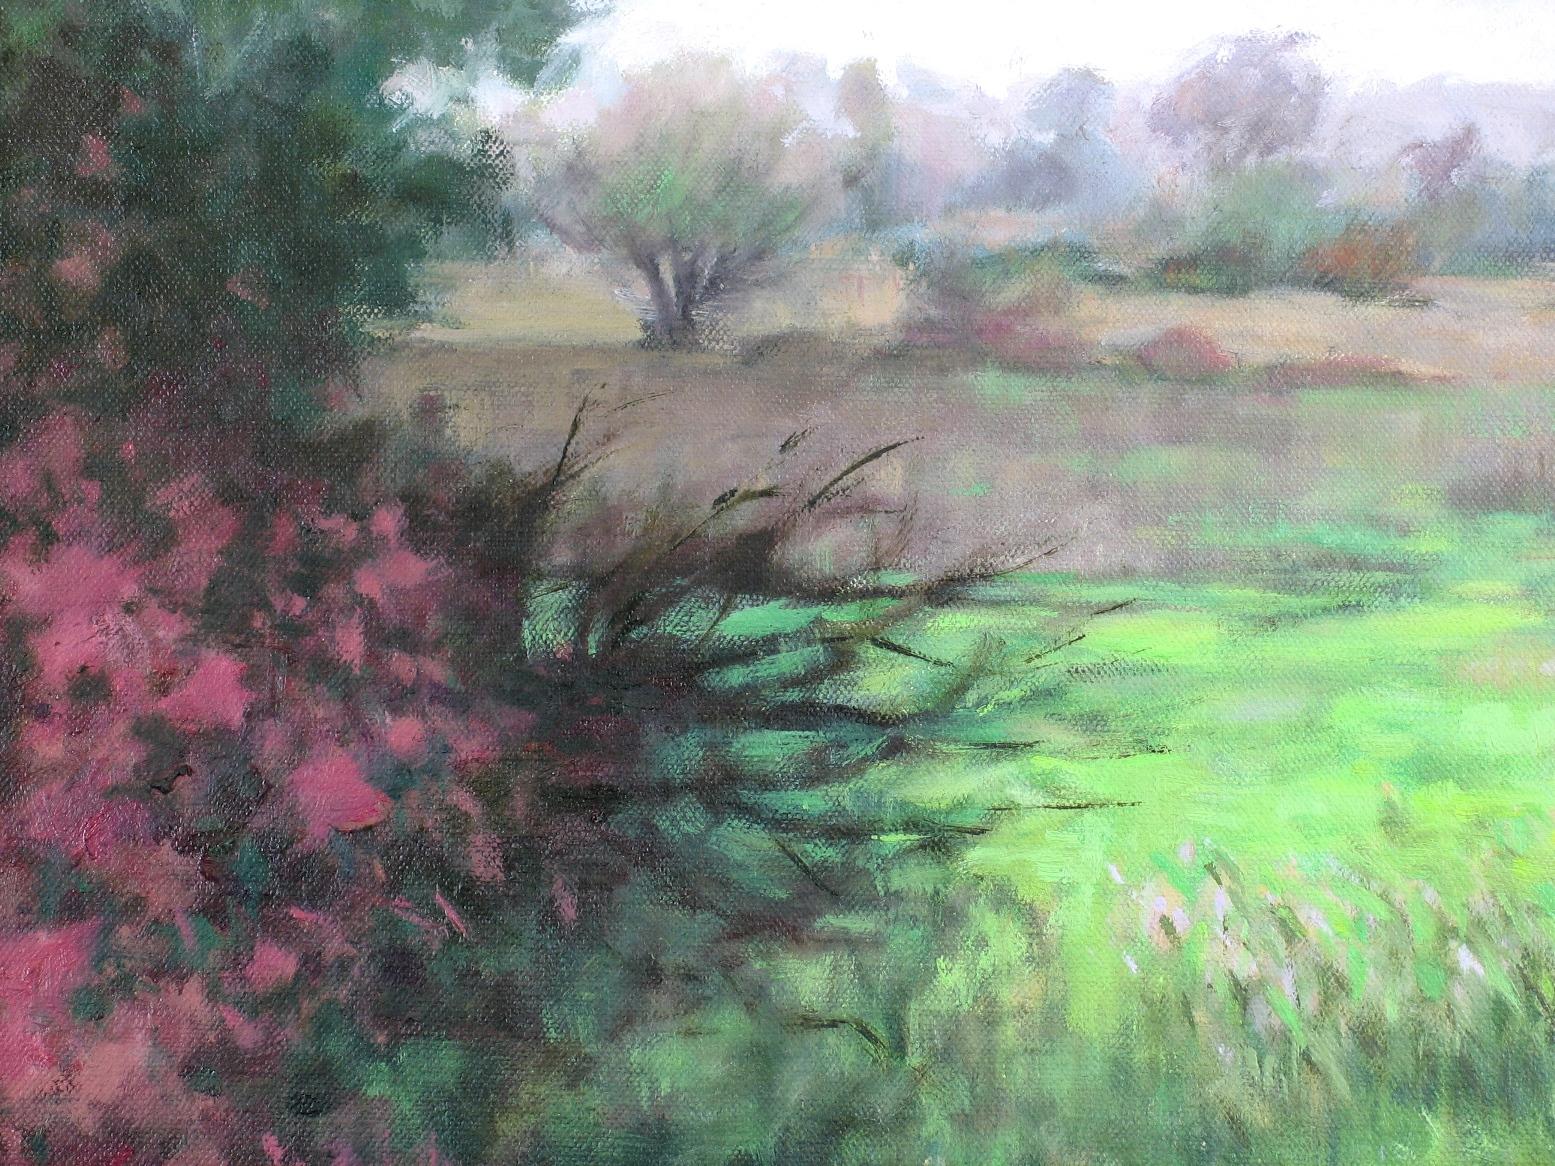 Wetland Sanctuary - Abstract Impressionist Painting by Suzanne Massion